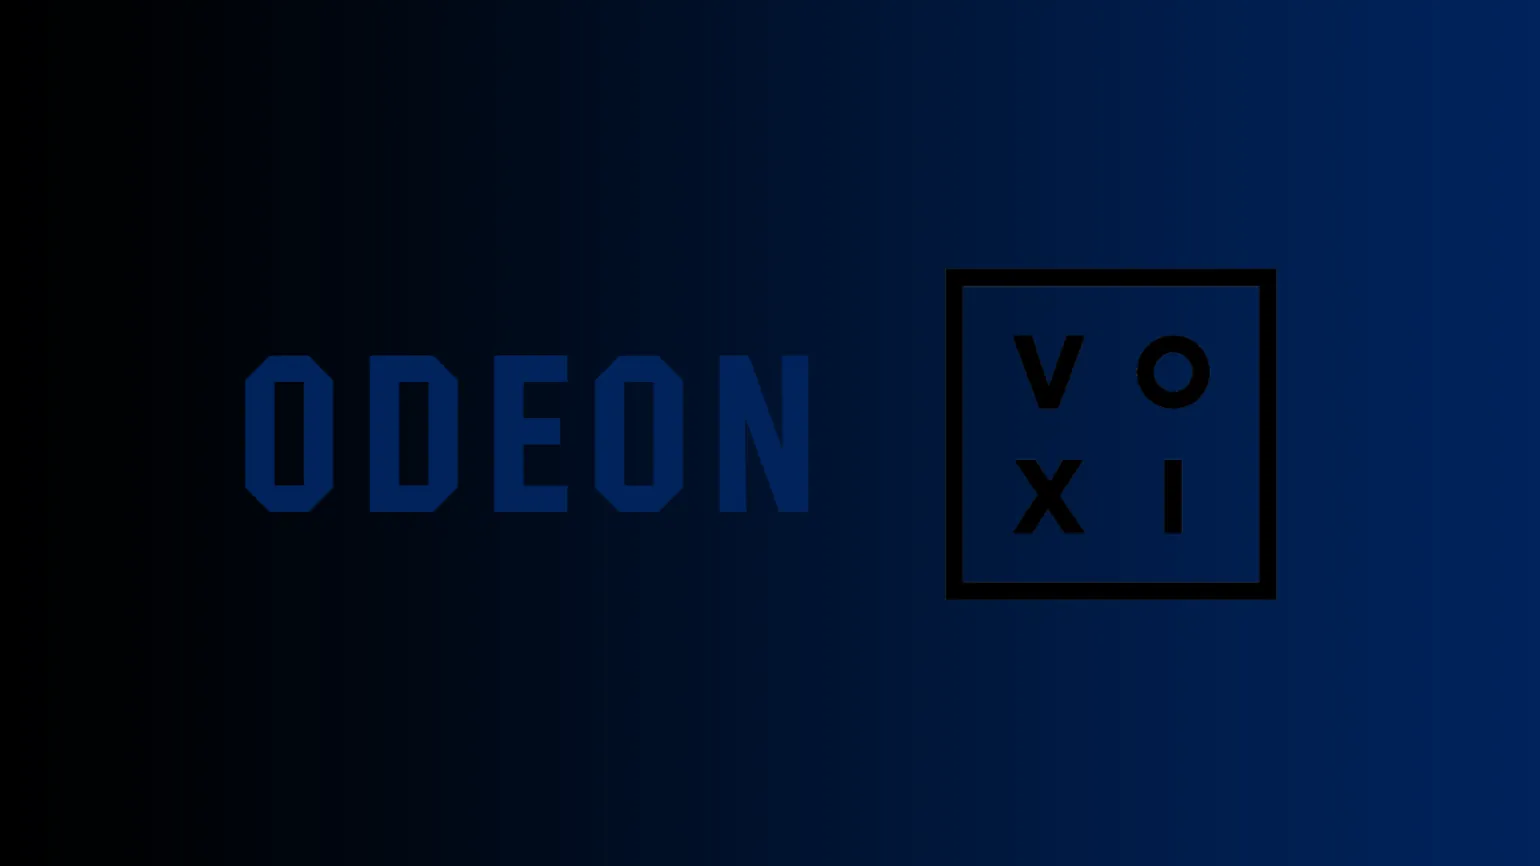 VOXI customers can get 2 ODEON tickets for just £8